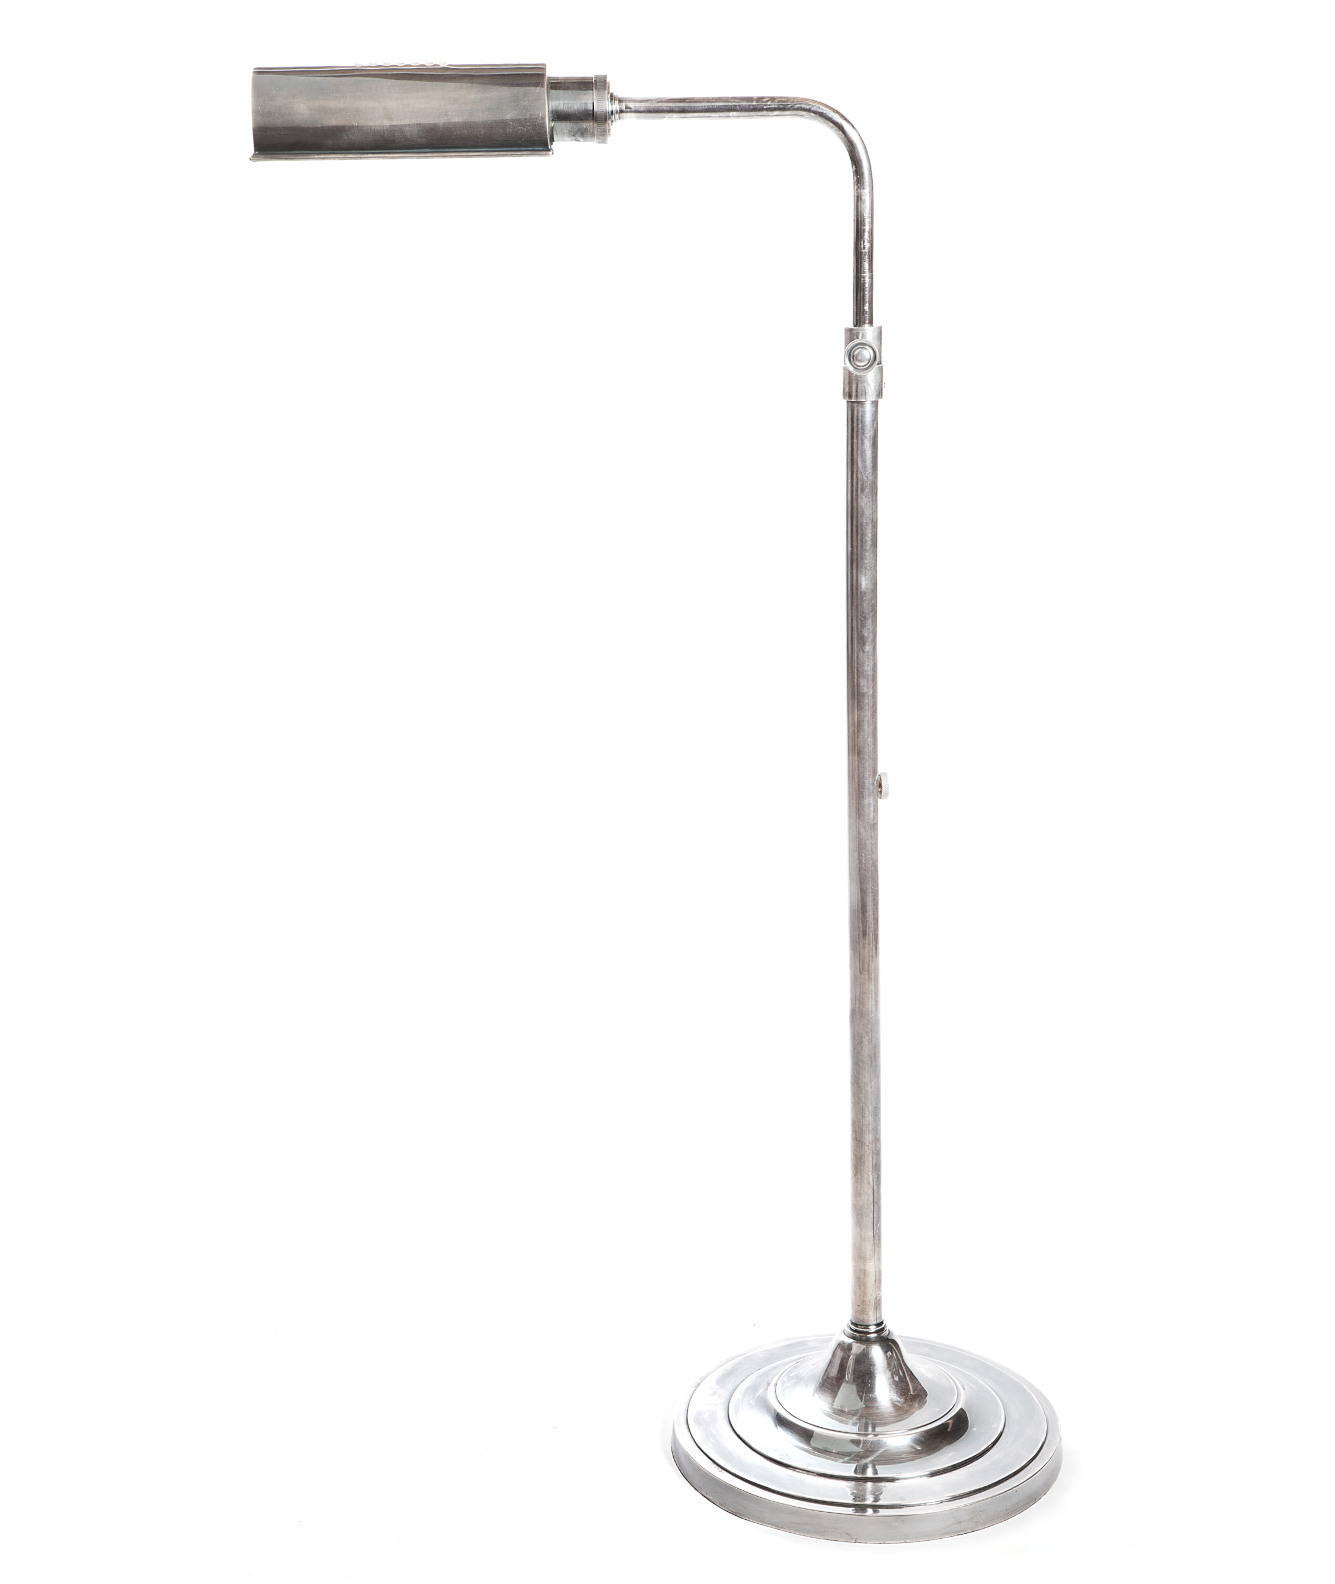 New Brooklyn Floor Lamp Emac Lawton Lamps For Sale Online